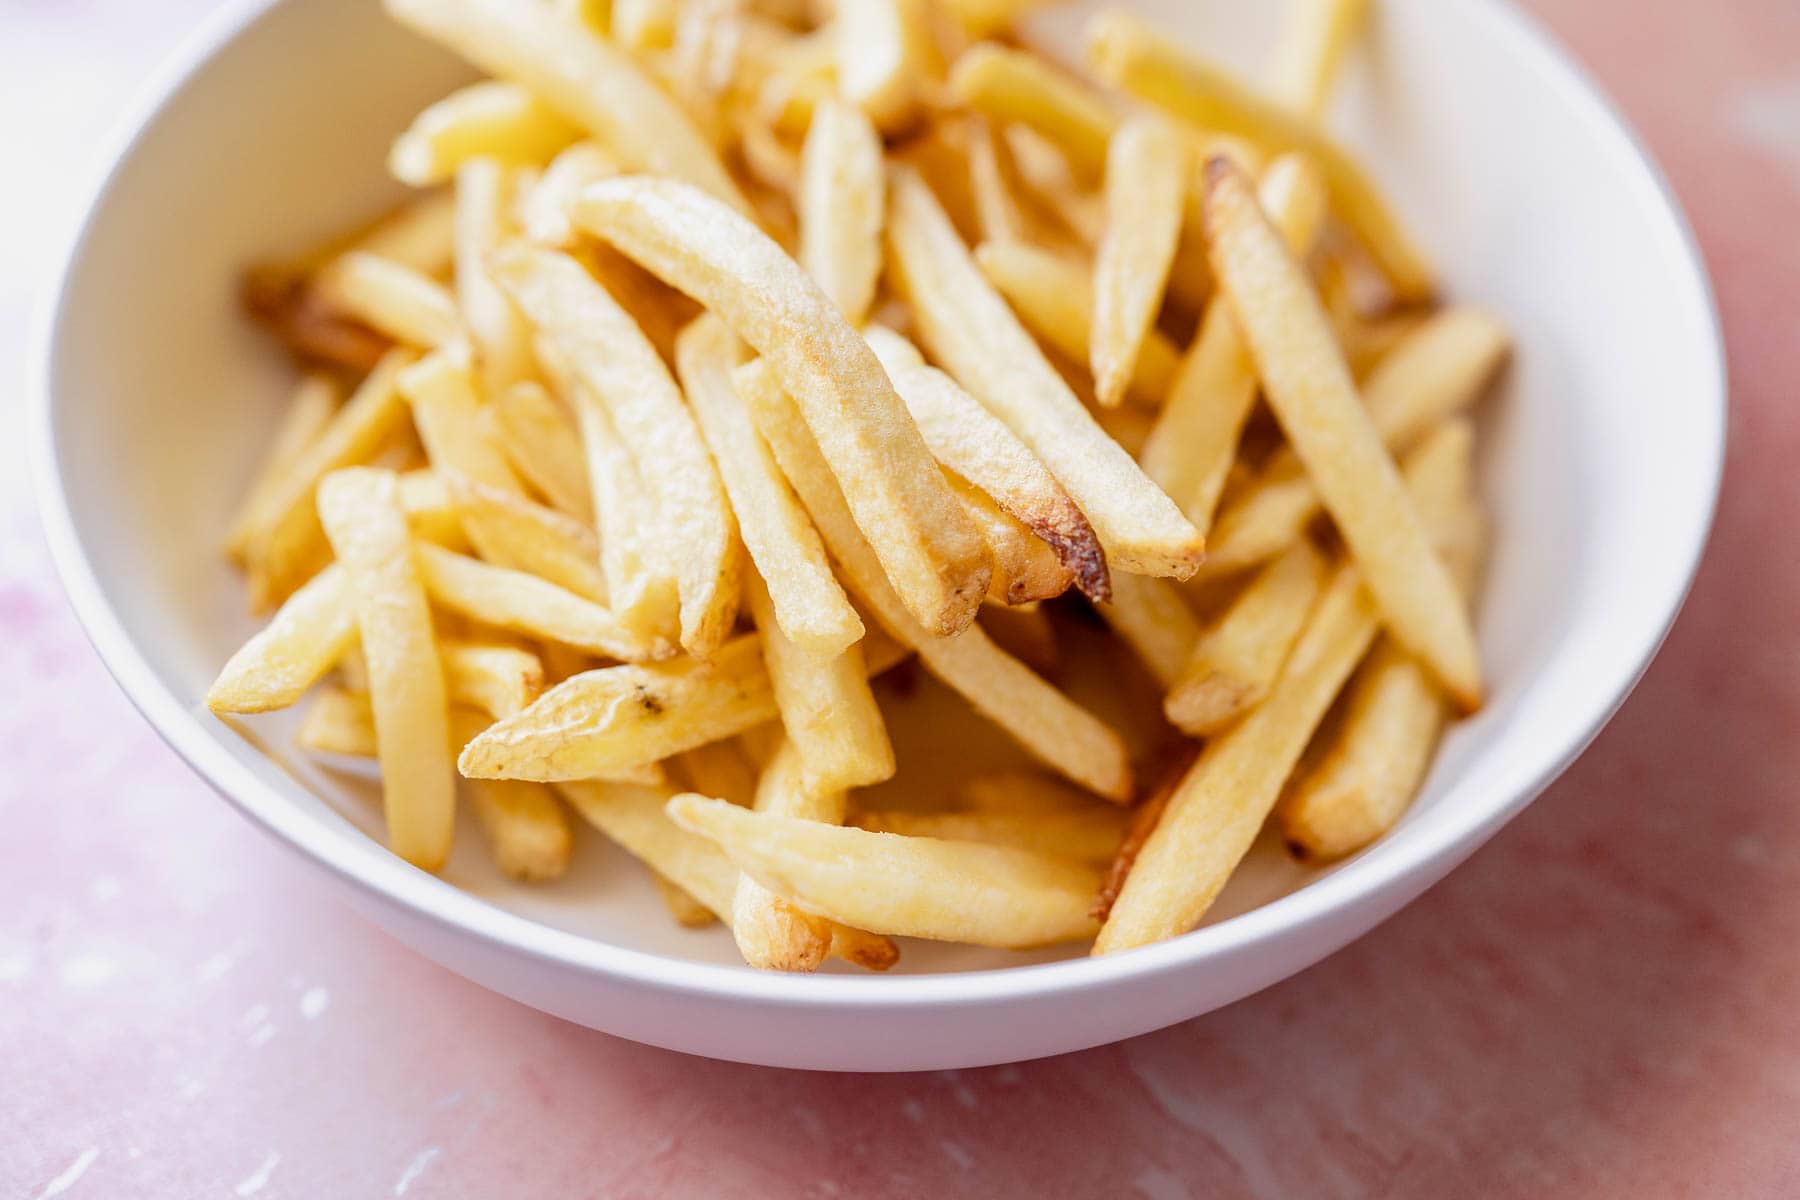 A bowl of freshly cooked air fryer french fries.